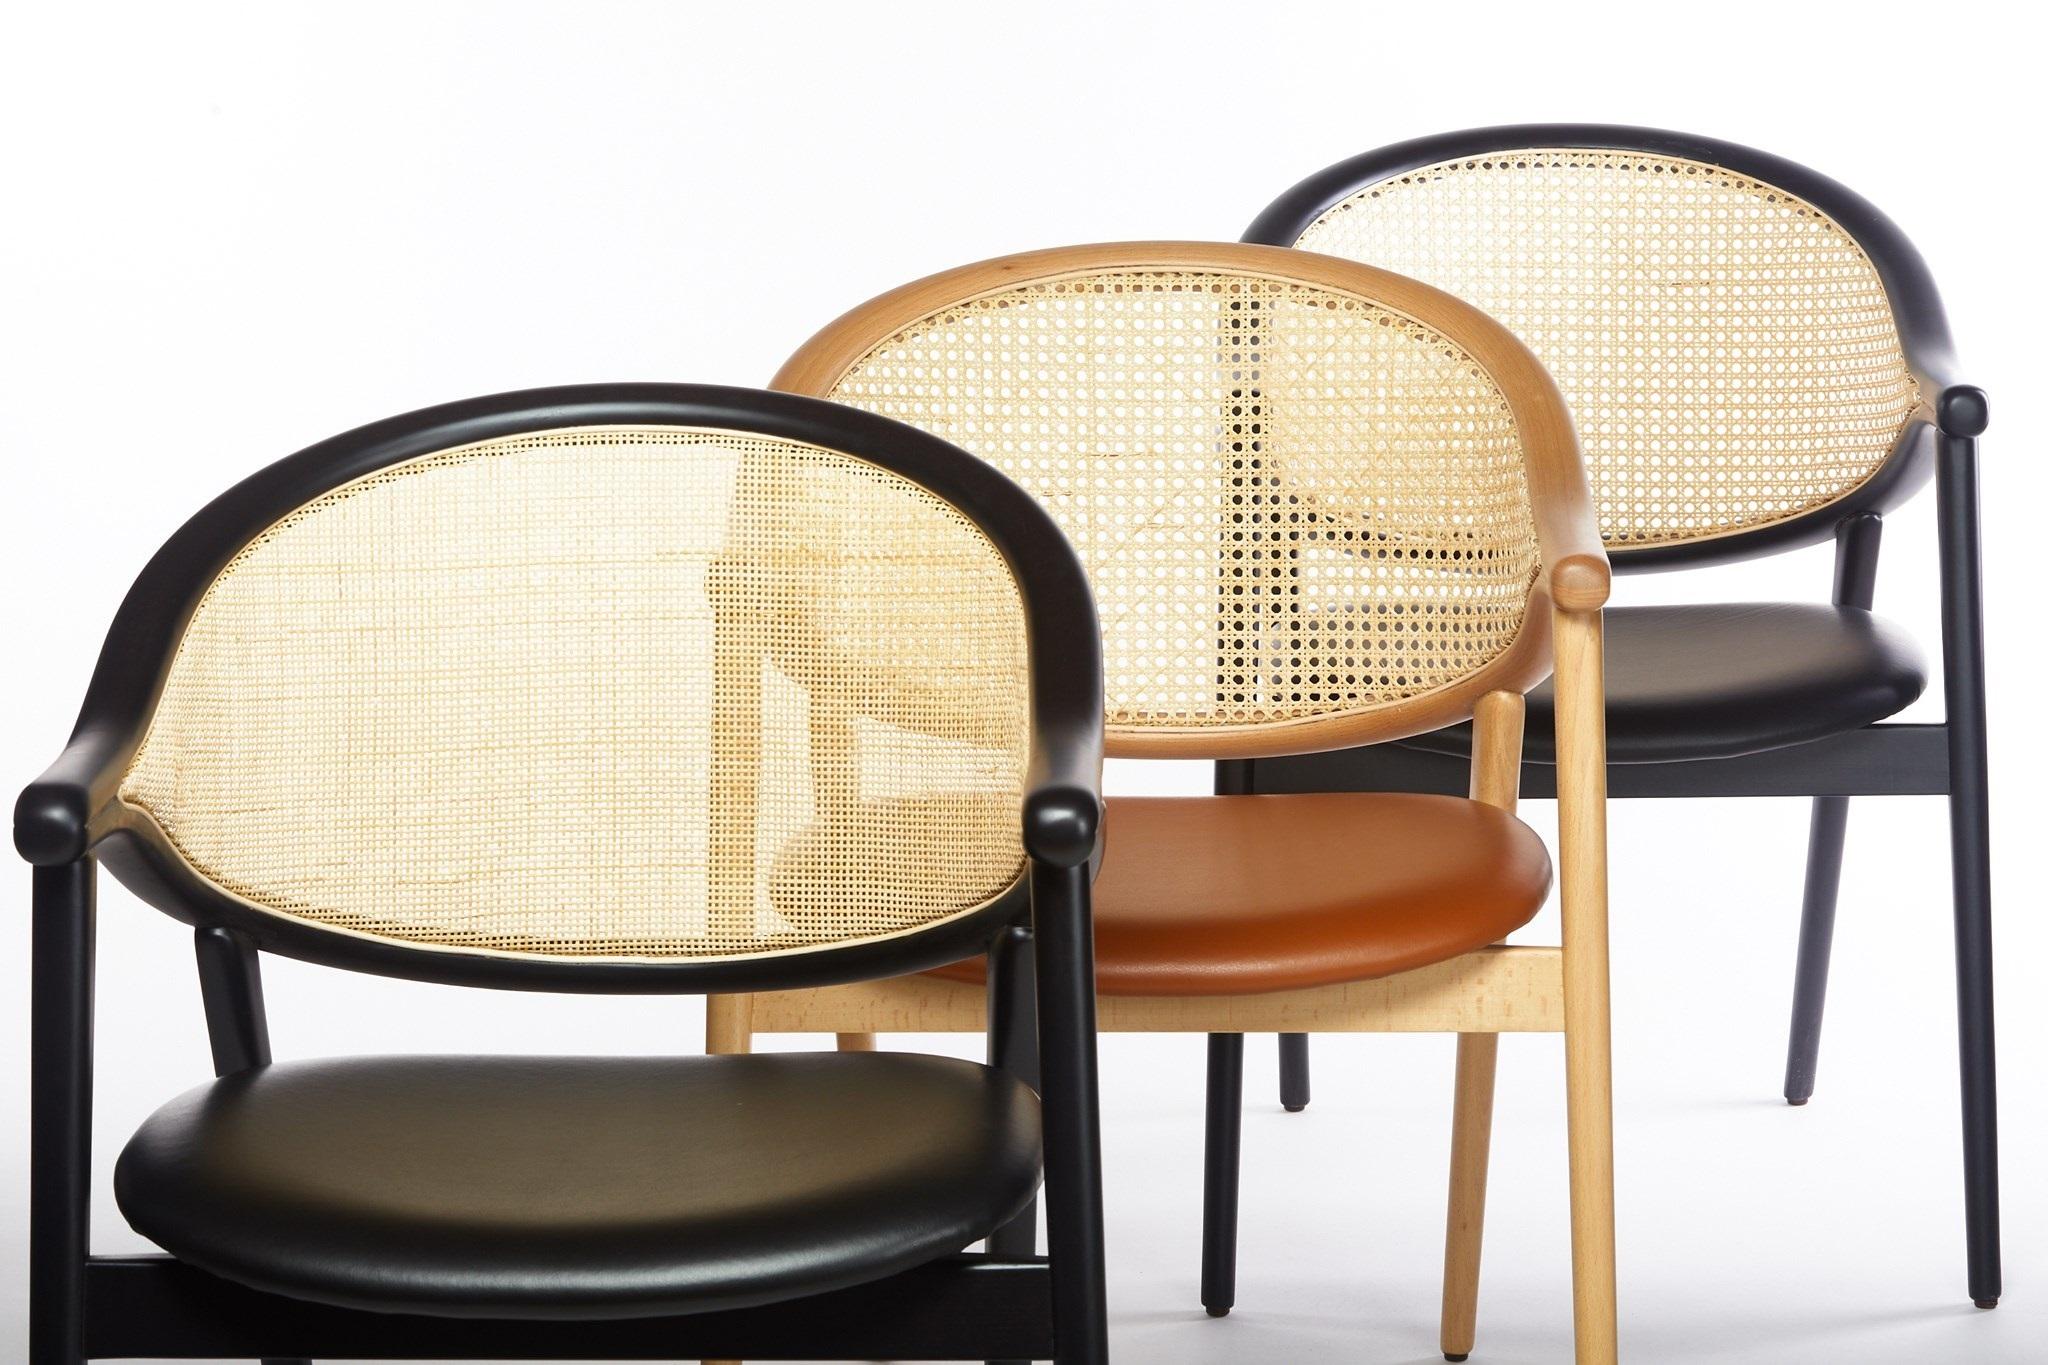 
This dining chair, at first glance, appears typical, yet upon closer inspection, it reveals unique features. The backrest, crafted from two elegantly curved pieces, coupled with a svelte frame, brings a lively and dynamic aspect to its design. The